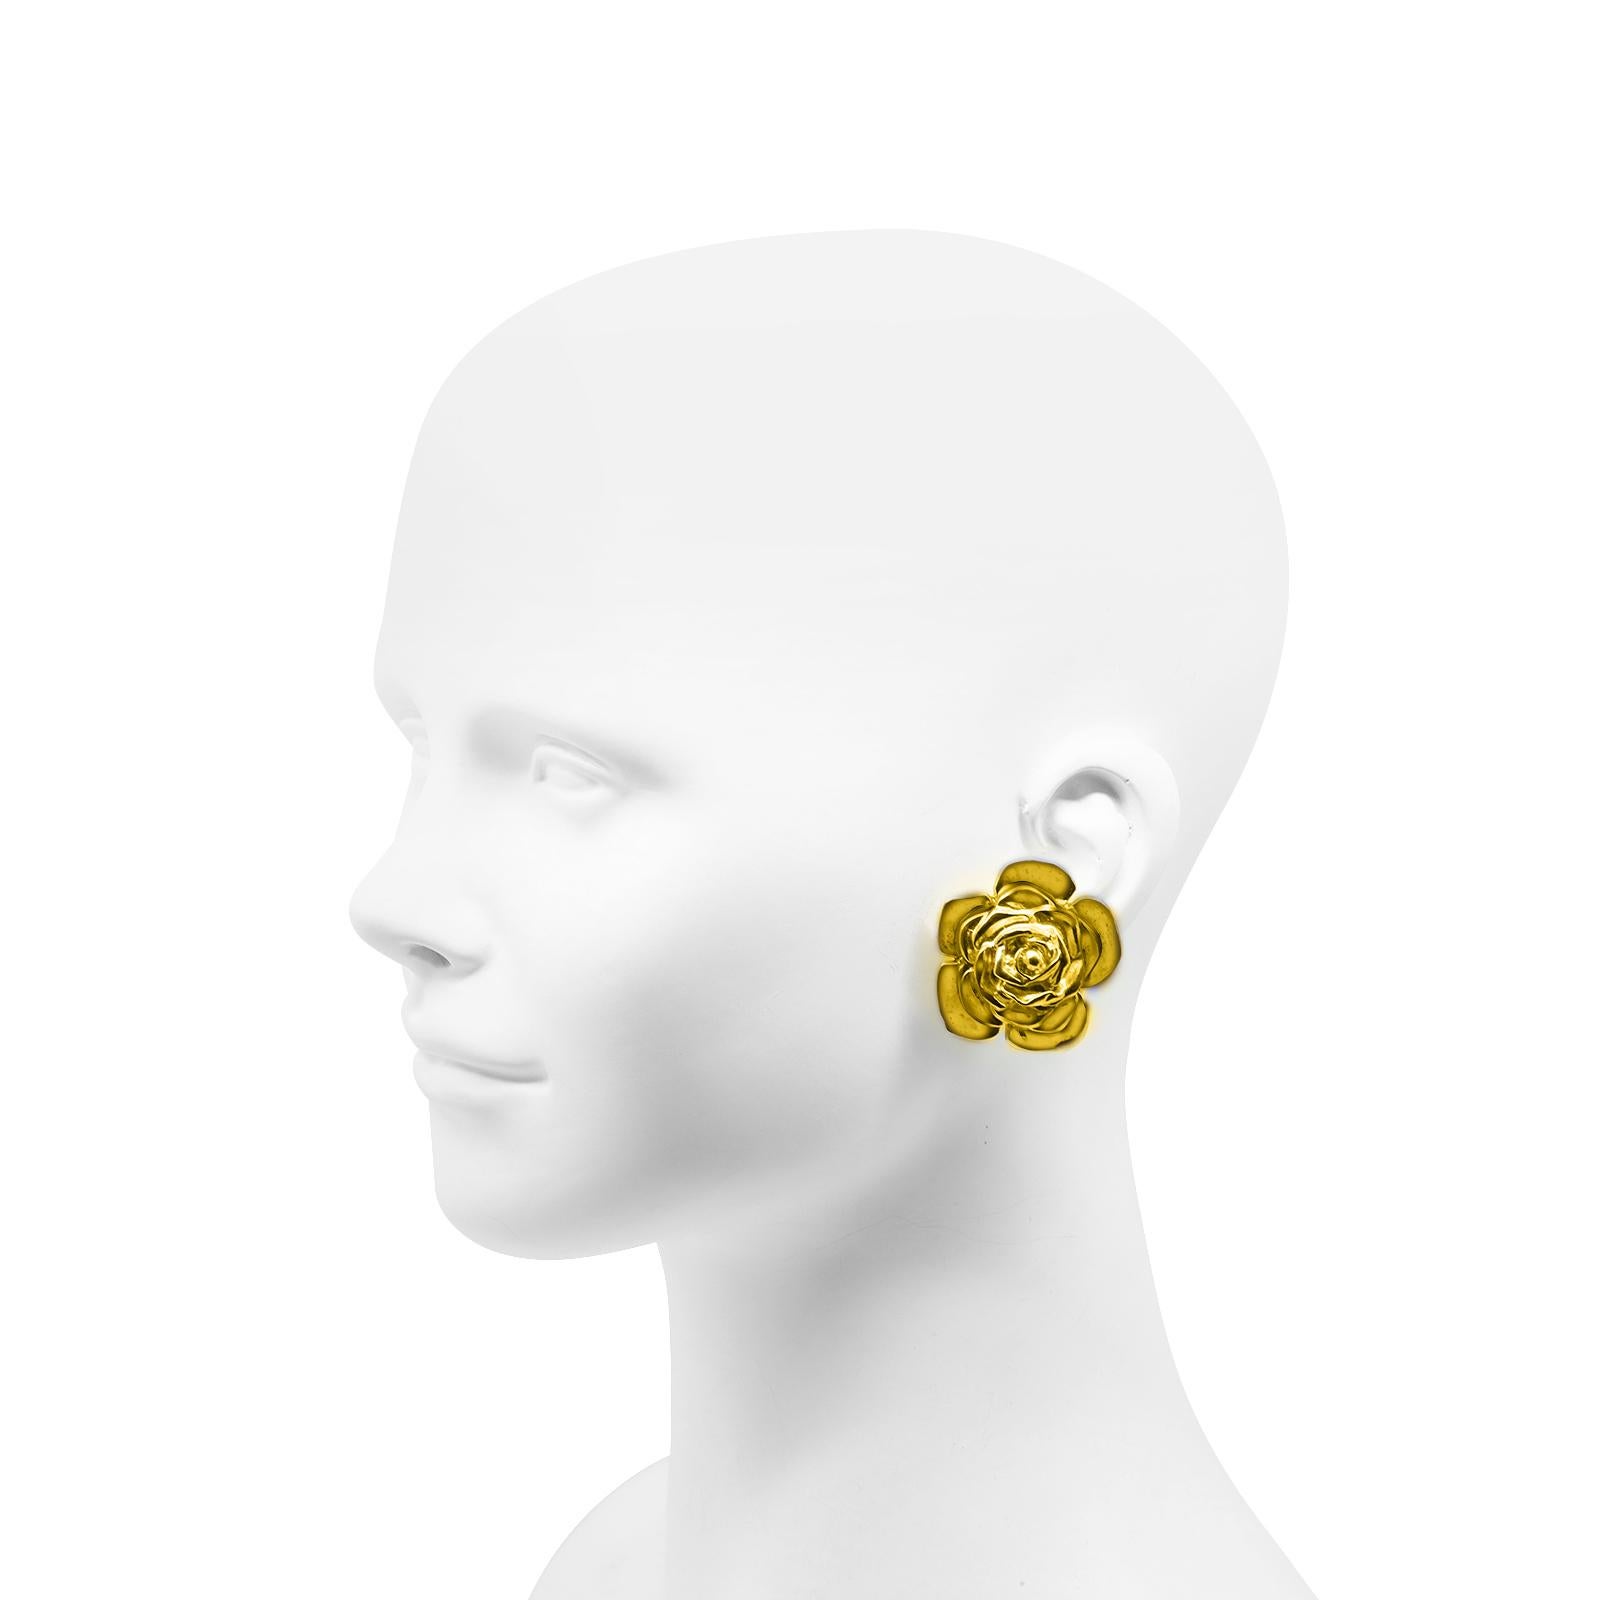 Vintage Maison Goossens Yves Saint Laurent YSL Gold Tone Rose Earrings.  Round and Round and you look like you are seeing a True Flower. Clip On. These are classic YSL. They look like what they say they are. Very chic.  Will always look great on.